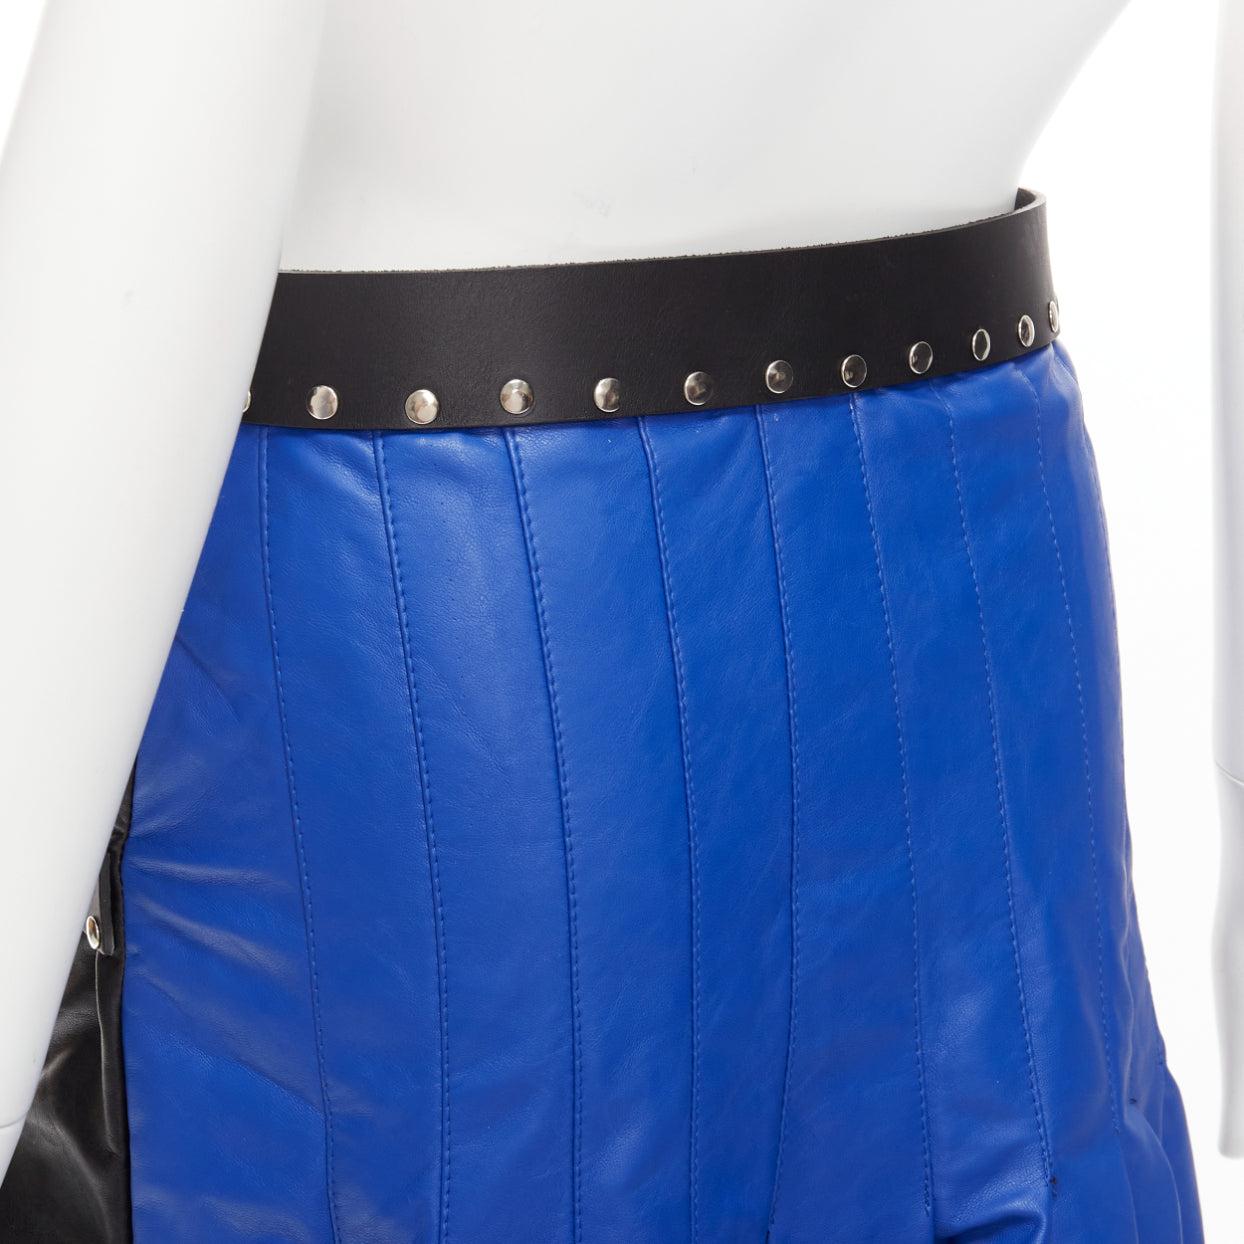 CHOPOVA LOWENA 2020 Runway black leather belt multi buckle studded gladiator skirt XS
Reference: AAWC/A00844
Brand: Chopova Lowena
Collection: Spring 2020 - Runway
Material: Fabric, Leather, Metal
Color: Black, Blue
Pattern: Solid
Closure: